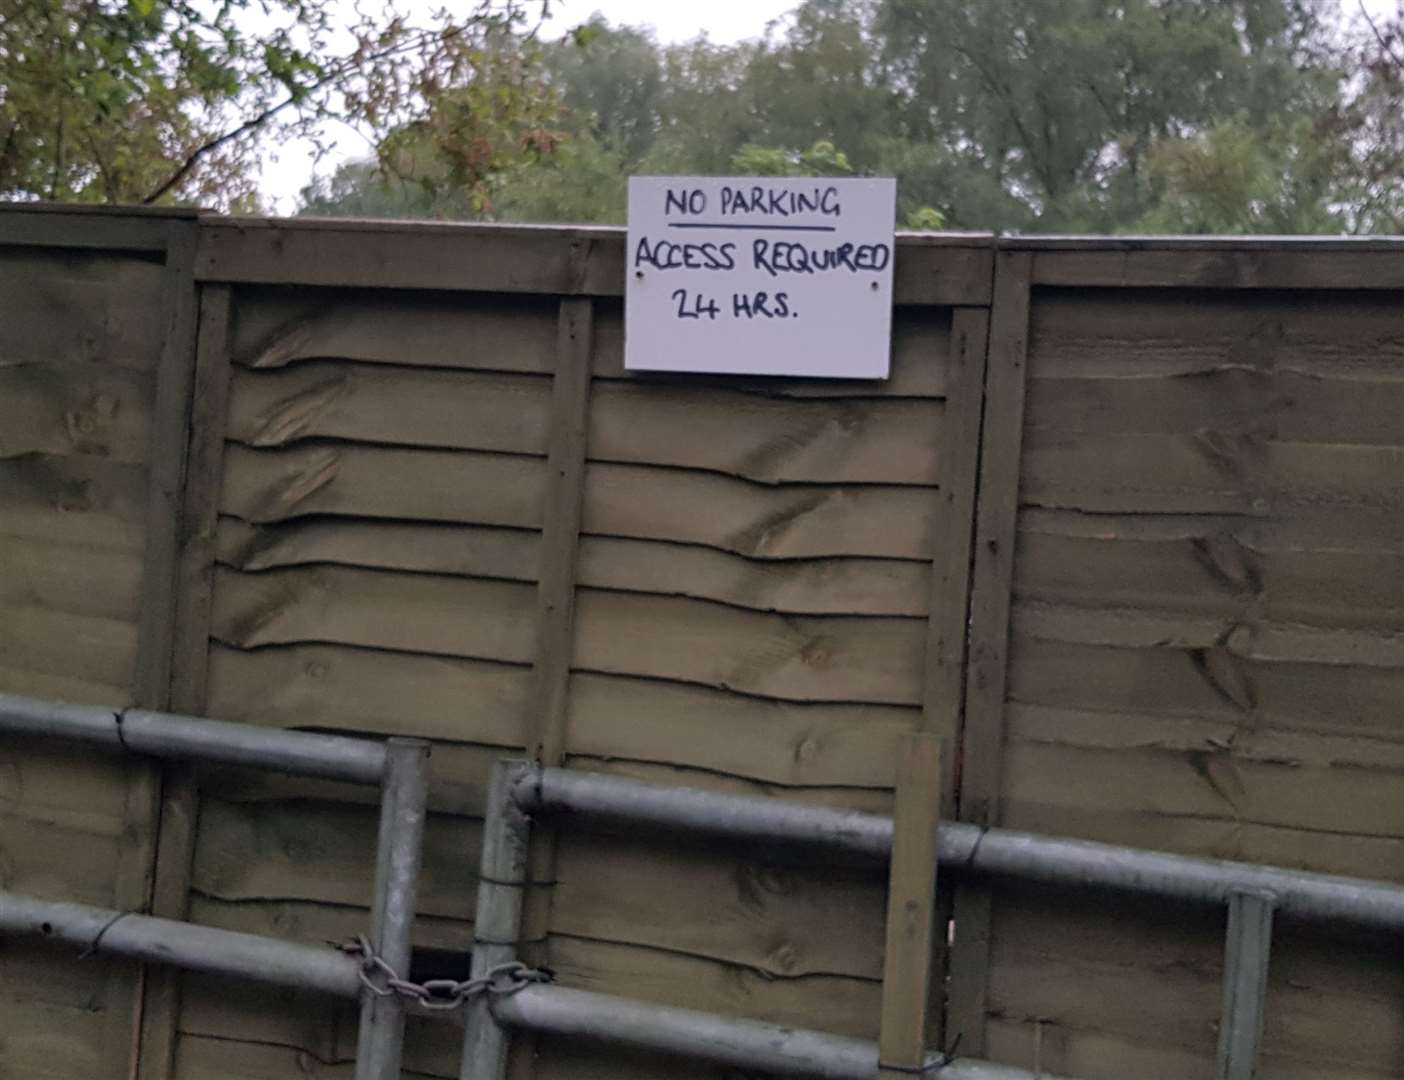 Travellers are living at a site in Leybourne, just off the M20, and have created a homemade sign, saying they need access to the land 24/7